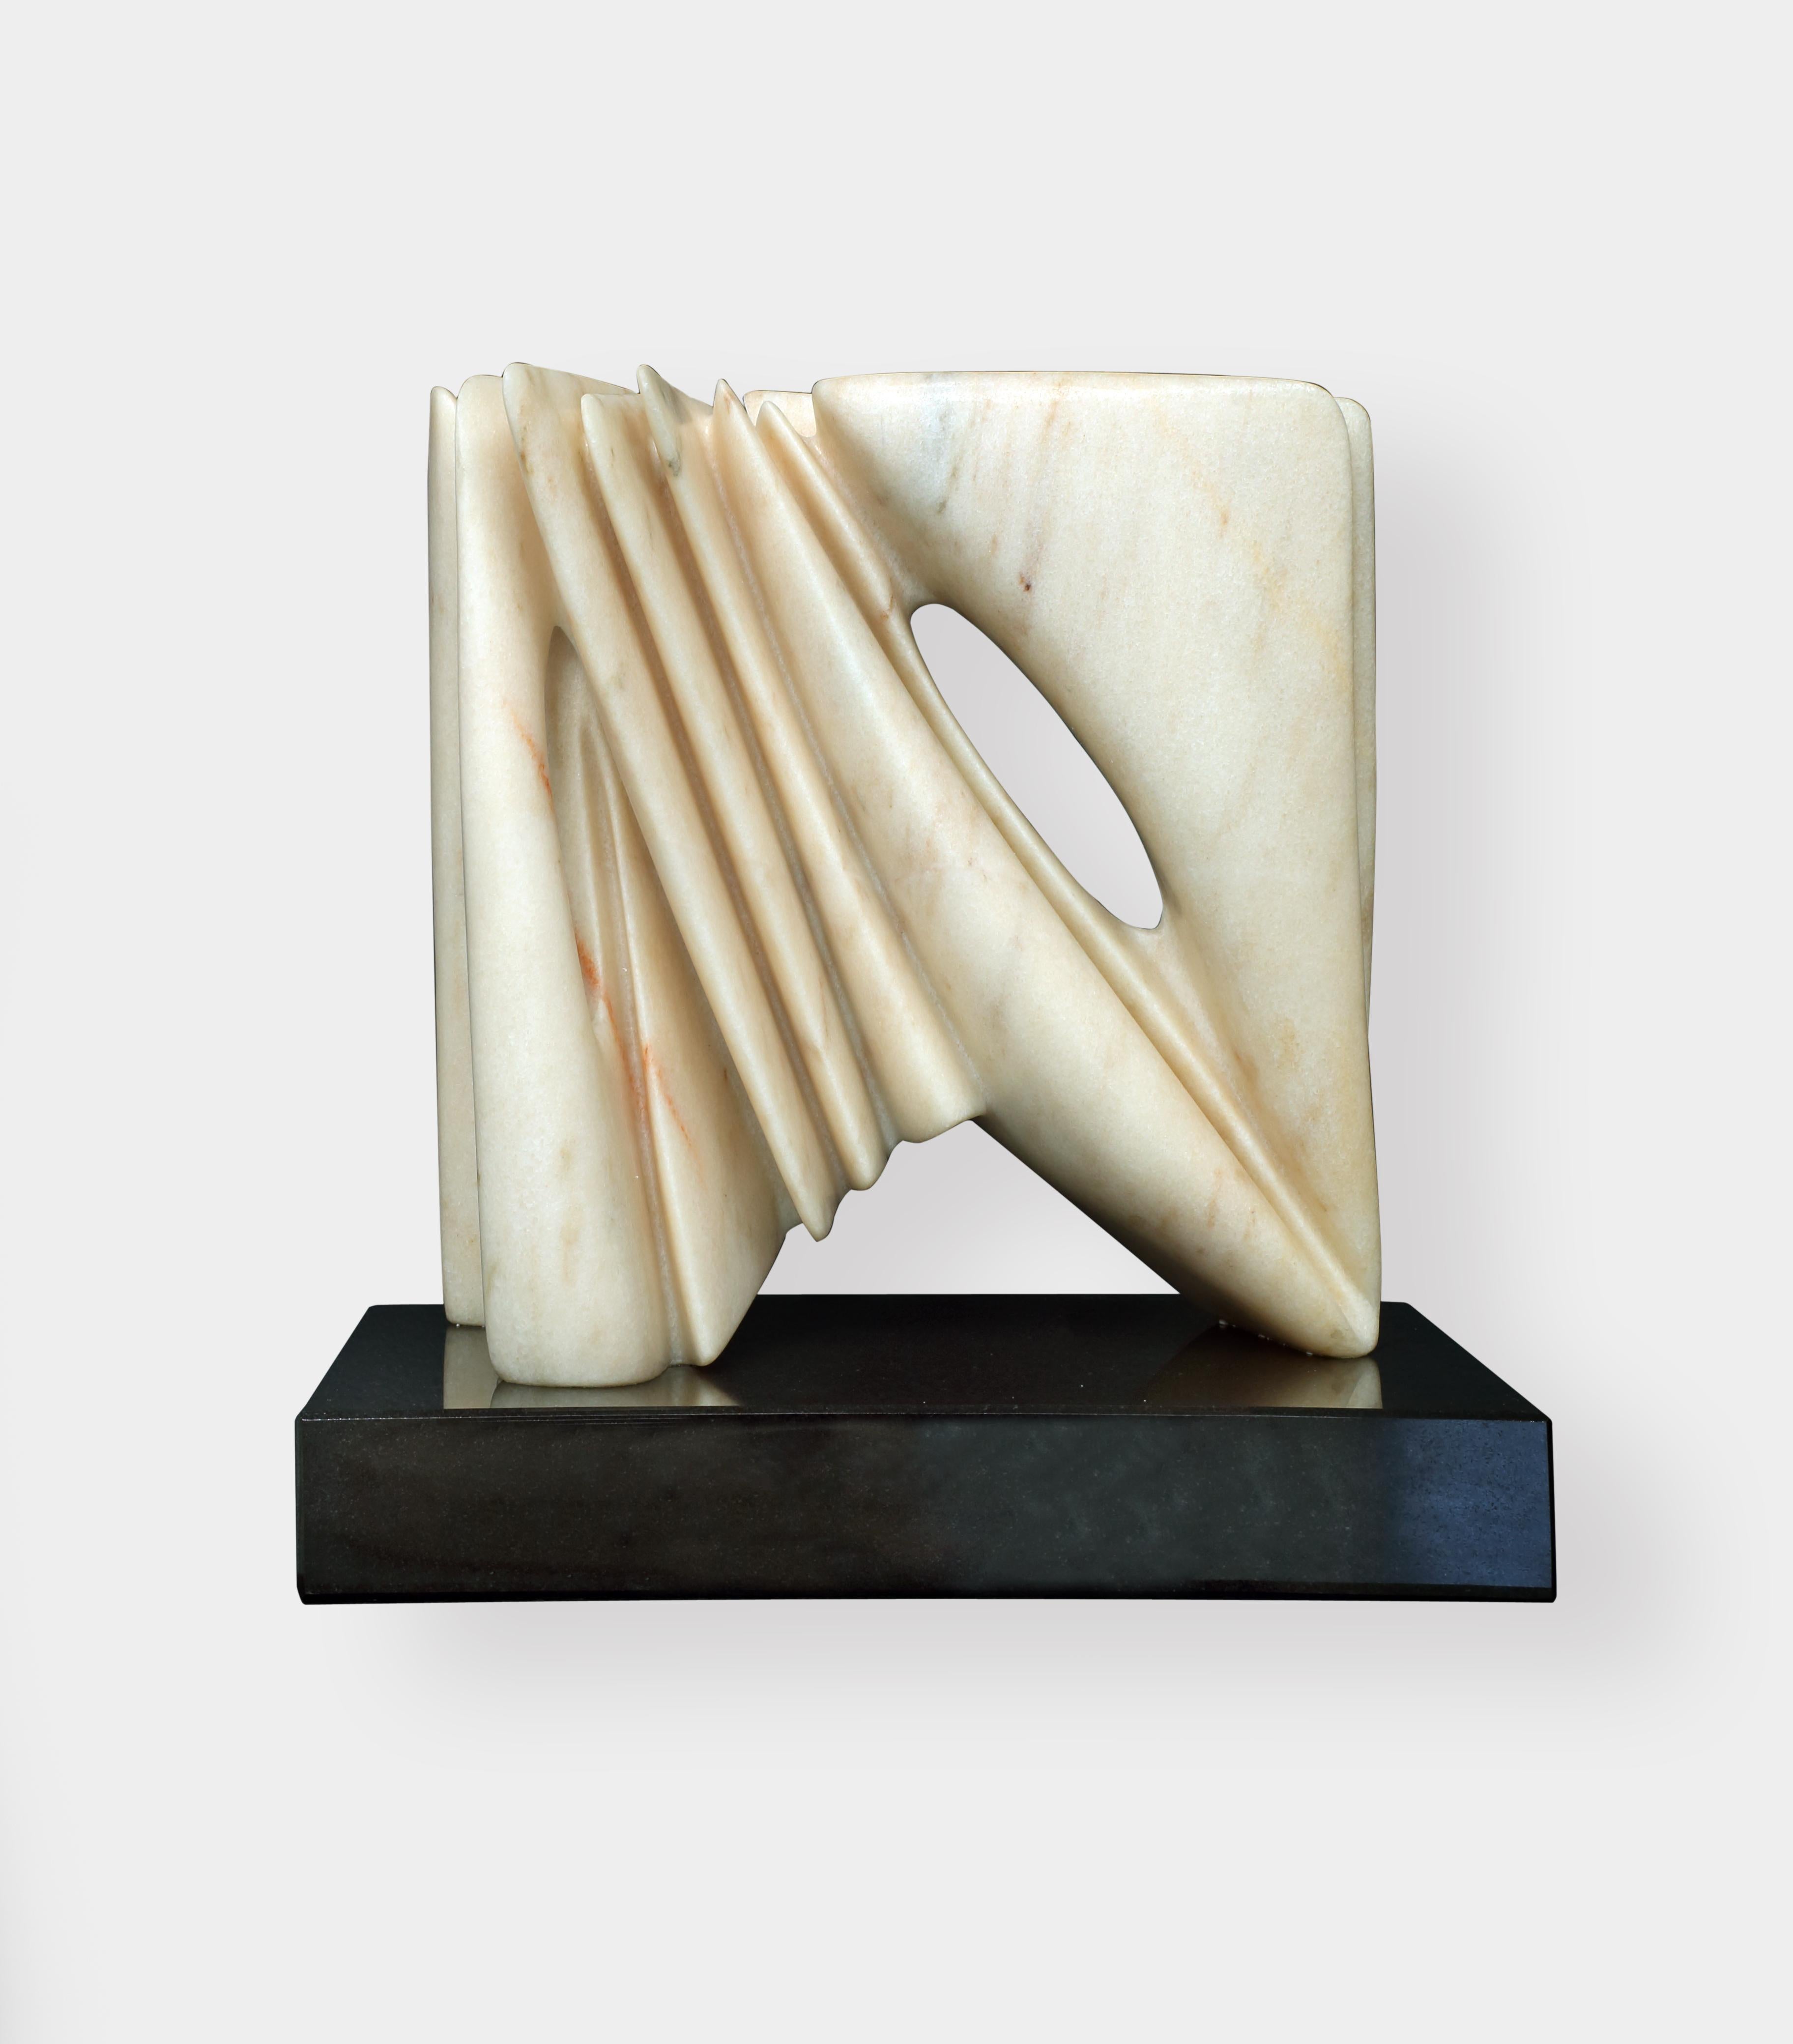 Pablo Atchugarry Abstract Sculpture - Untitled